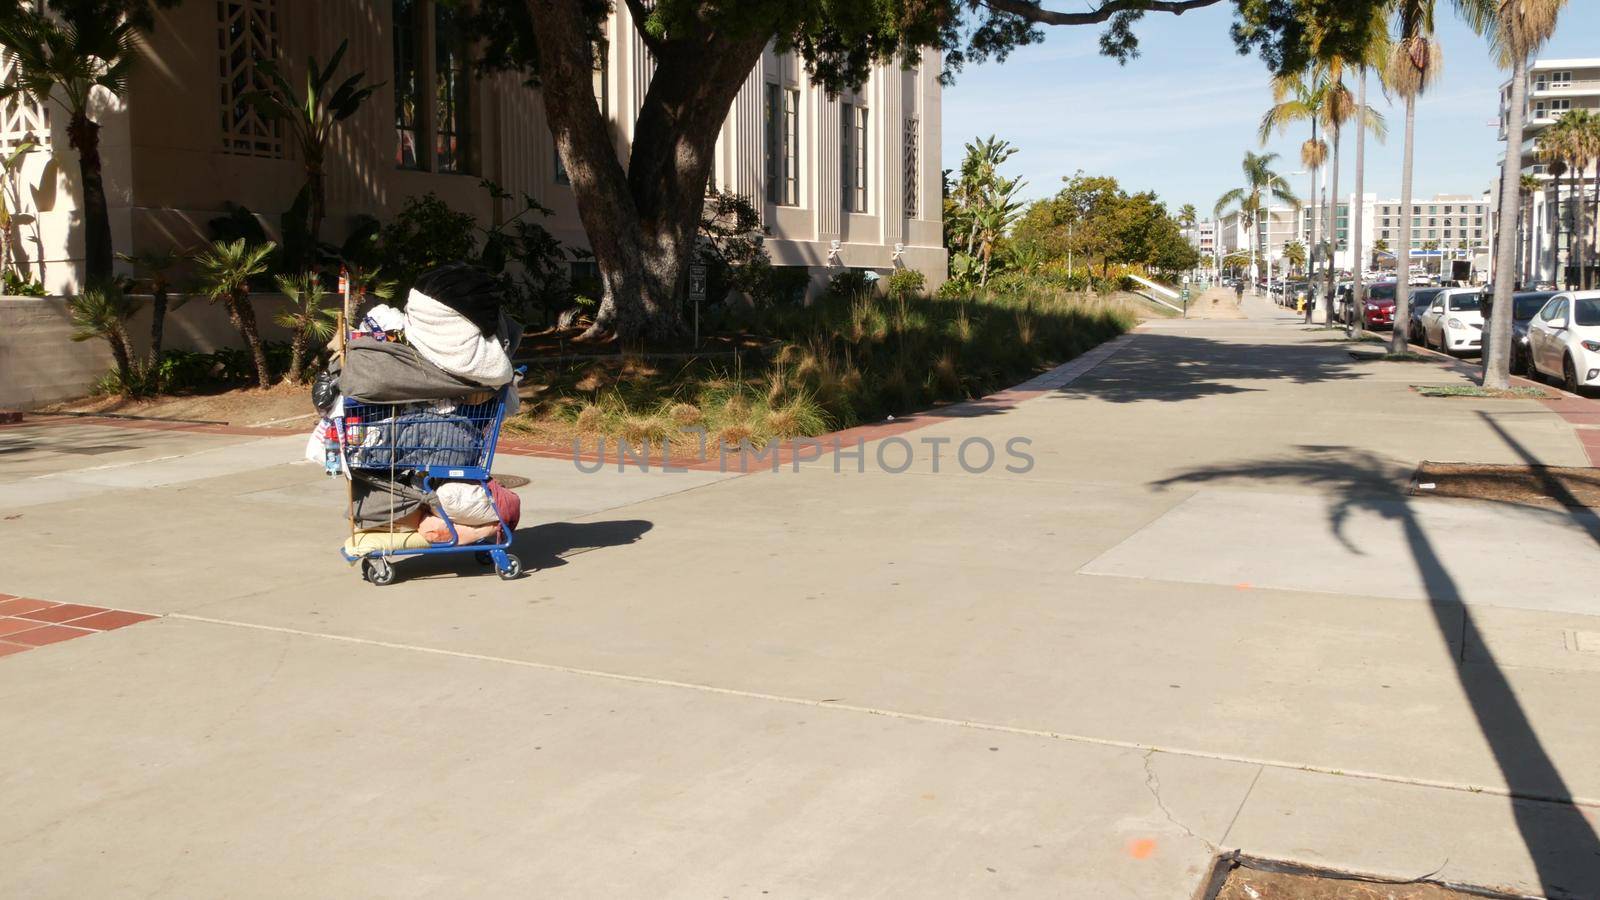 SAN DIEGO, CALIFORNIA USA - 30 JAN 2020: Stuff of homeless street people on walkway, truck on roadside. Begging problem in downtown of city near Los Angeles. Jobless beggars trolley cart on pavement by DogoraSun